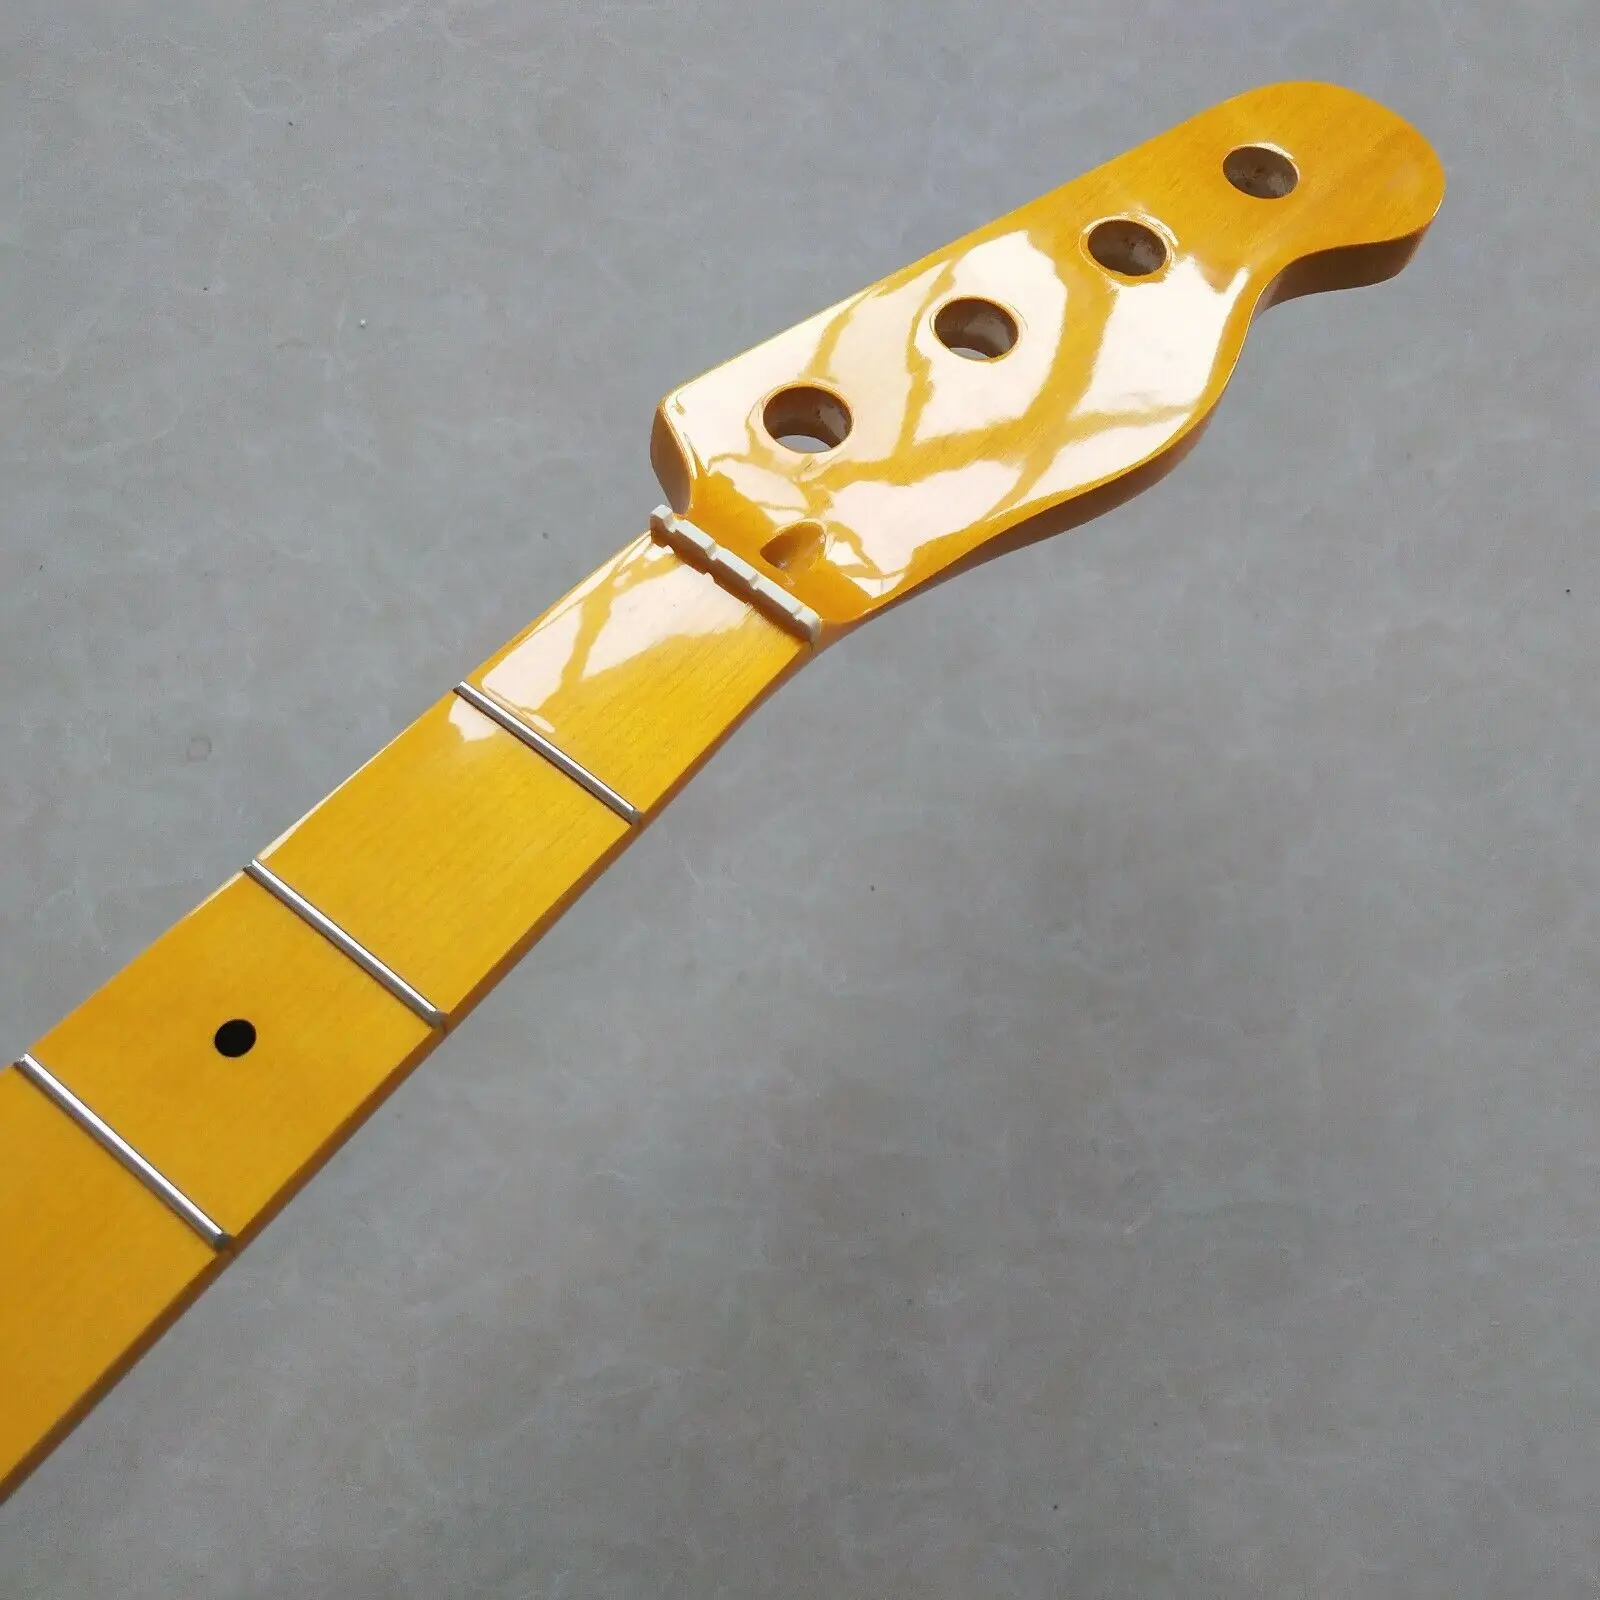 New Gloss Jazz bass guitar neck parts 20 fret 34 inch Maple Fretboard dots Inlay enlarge